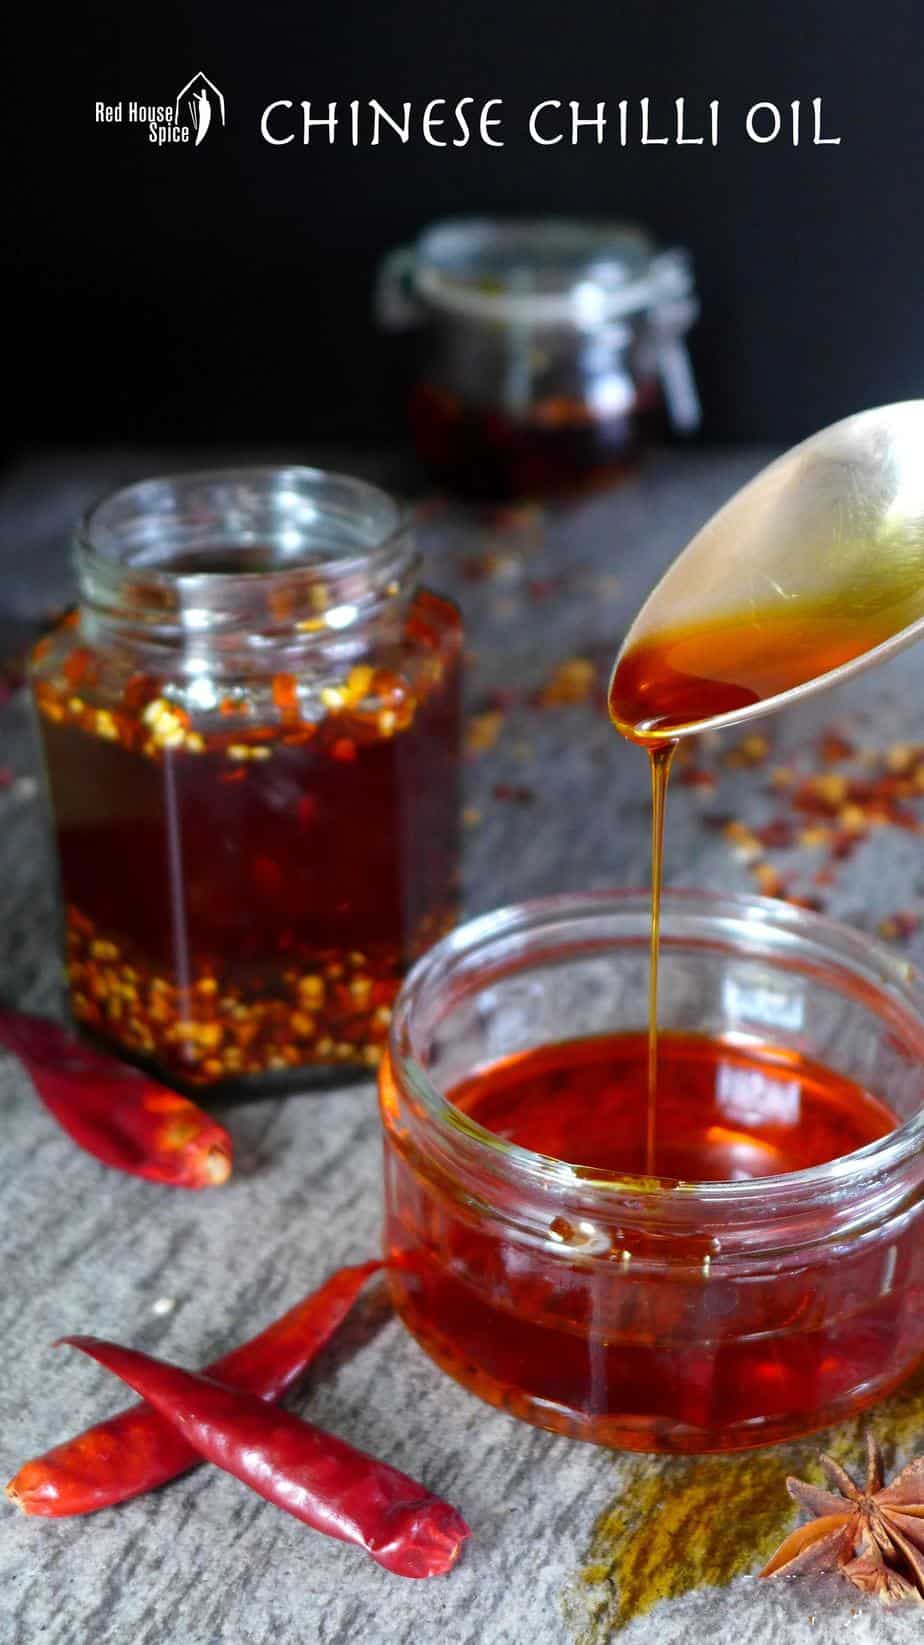 Effortless and effective recipe for homemade Chinese chilli oil, an essential condiment for Chinese cuisine. Great company for noodles, dumplings and salad.